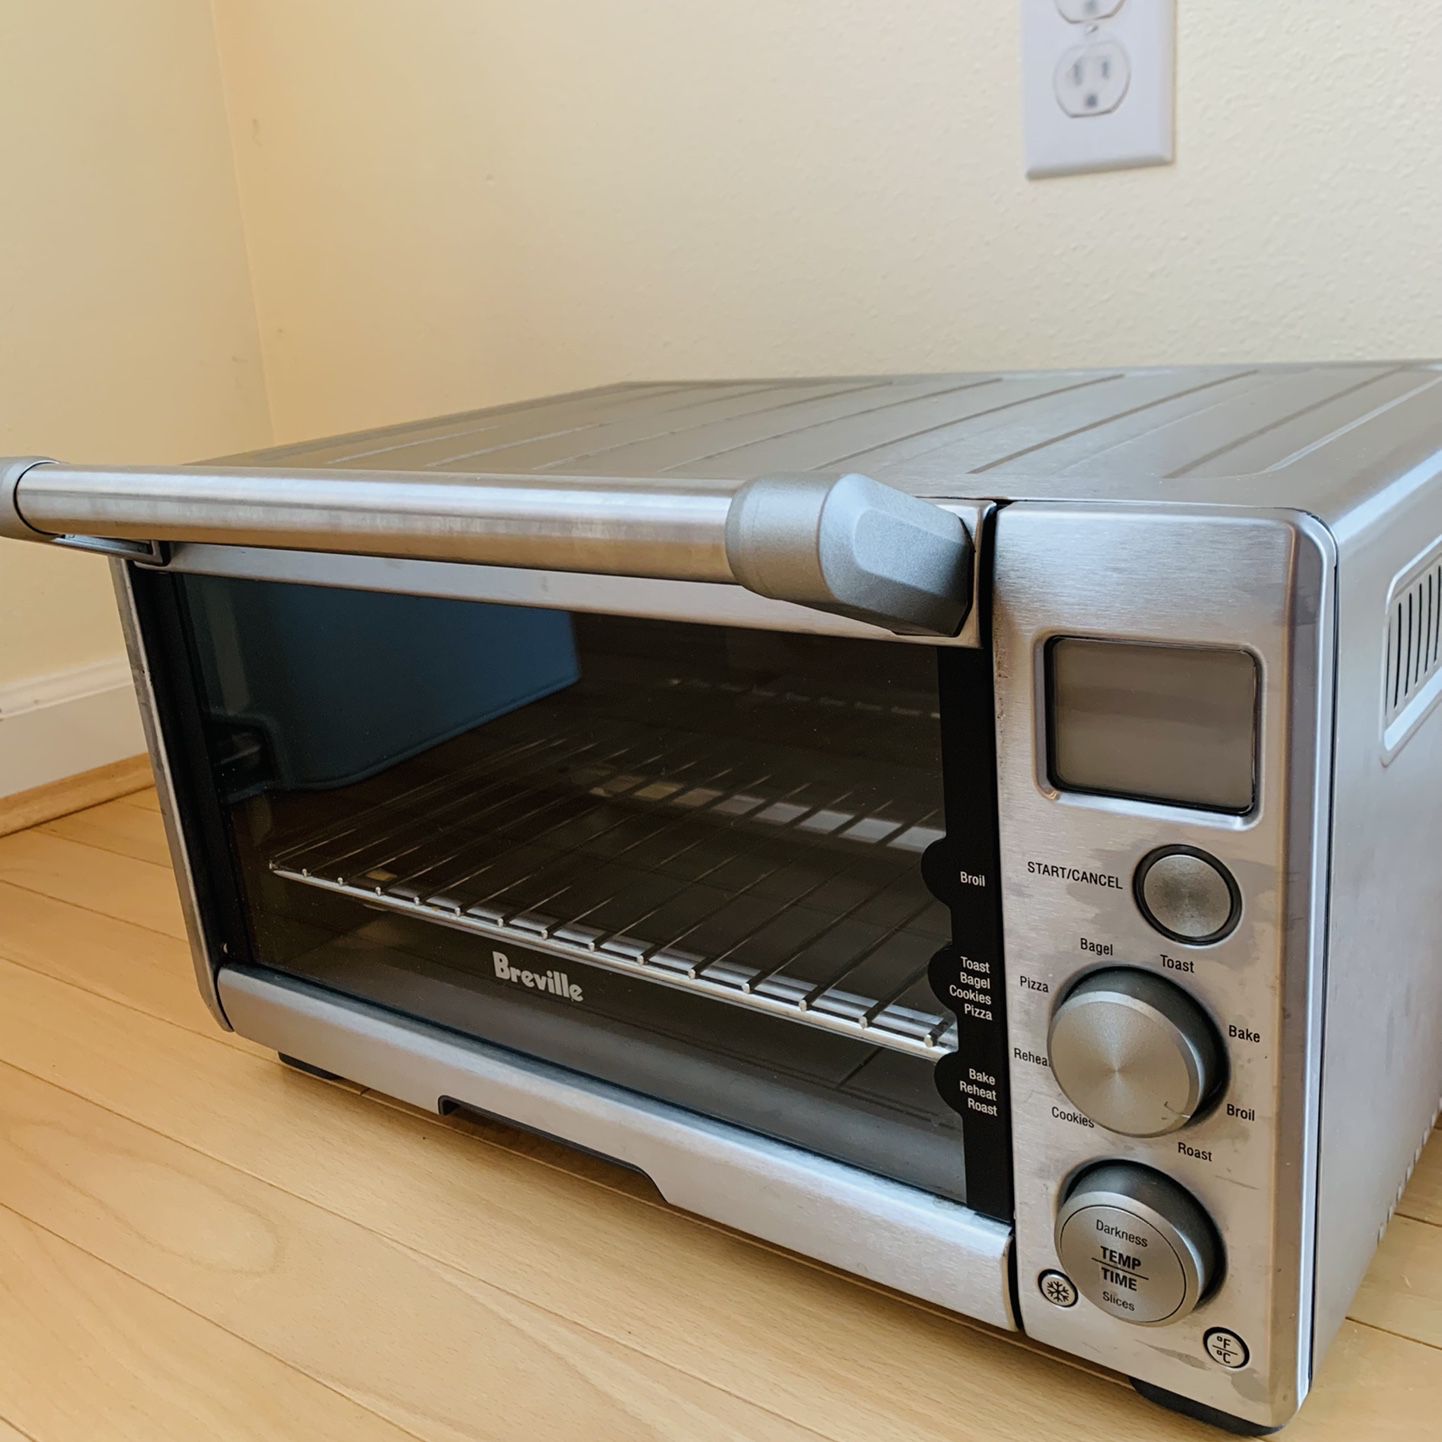 Breville Compact Smart Oven BOV650XL for Sale in Seatac, WA - OfferUp